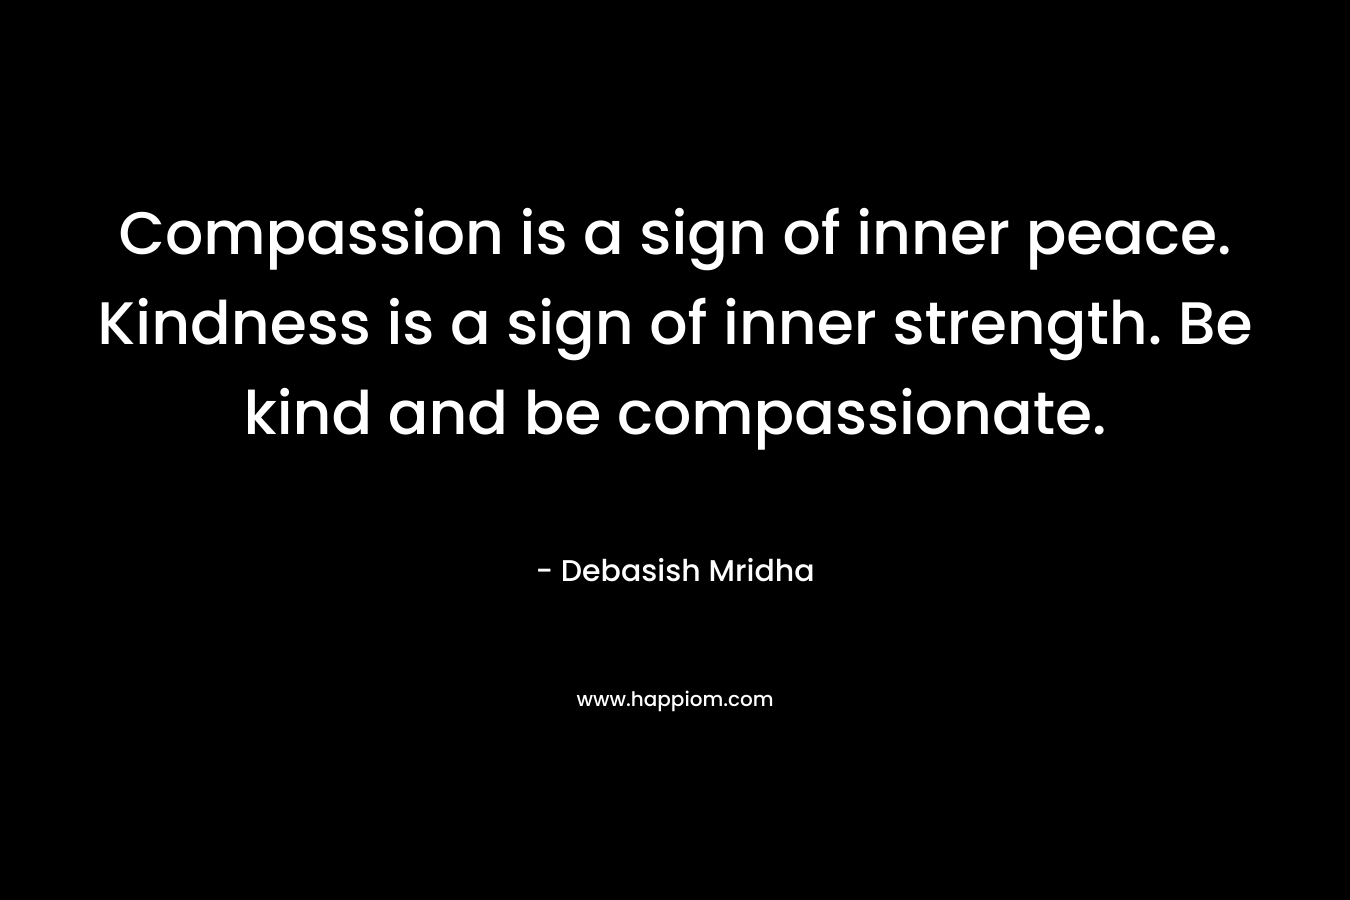 Compassion is a sign of inner peace. Kindness is a sign of inner strength. Be kind and be compassionate.